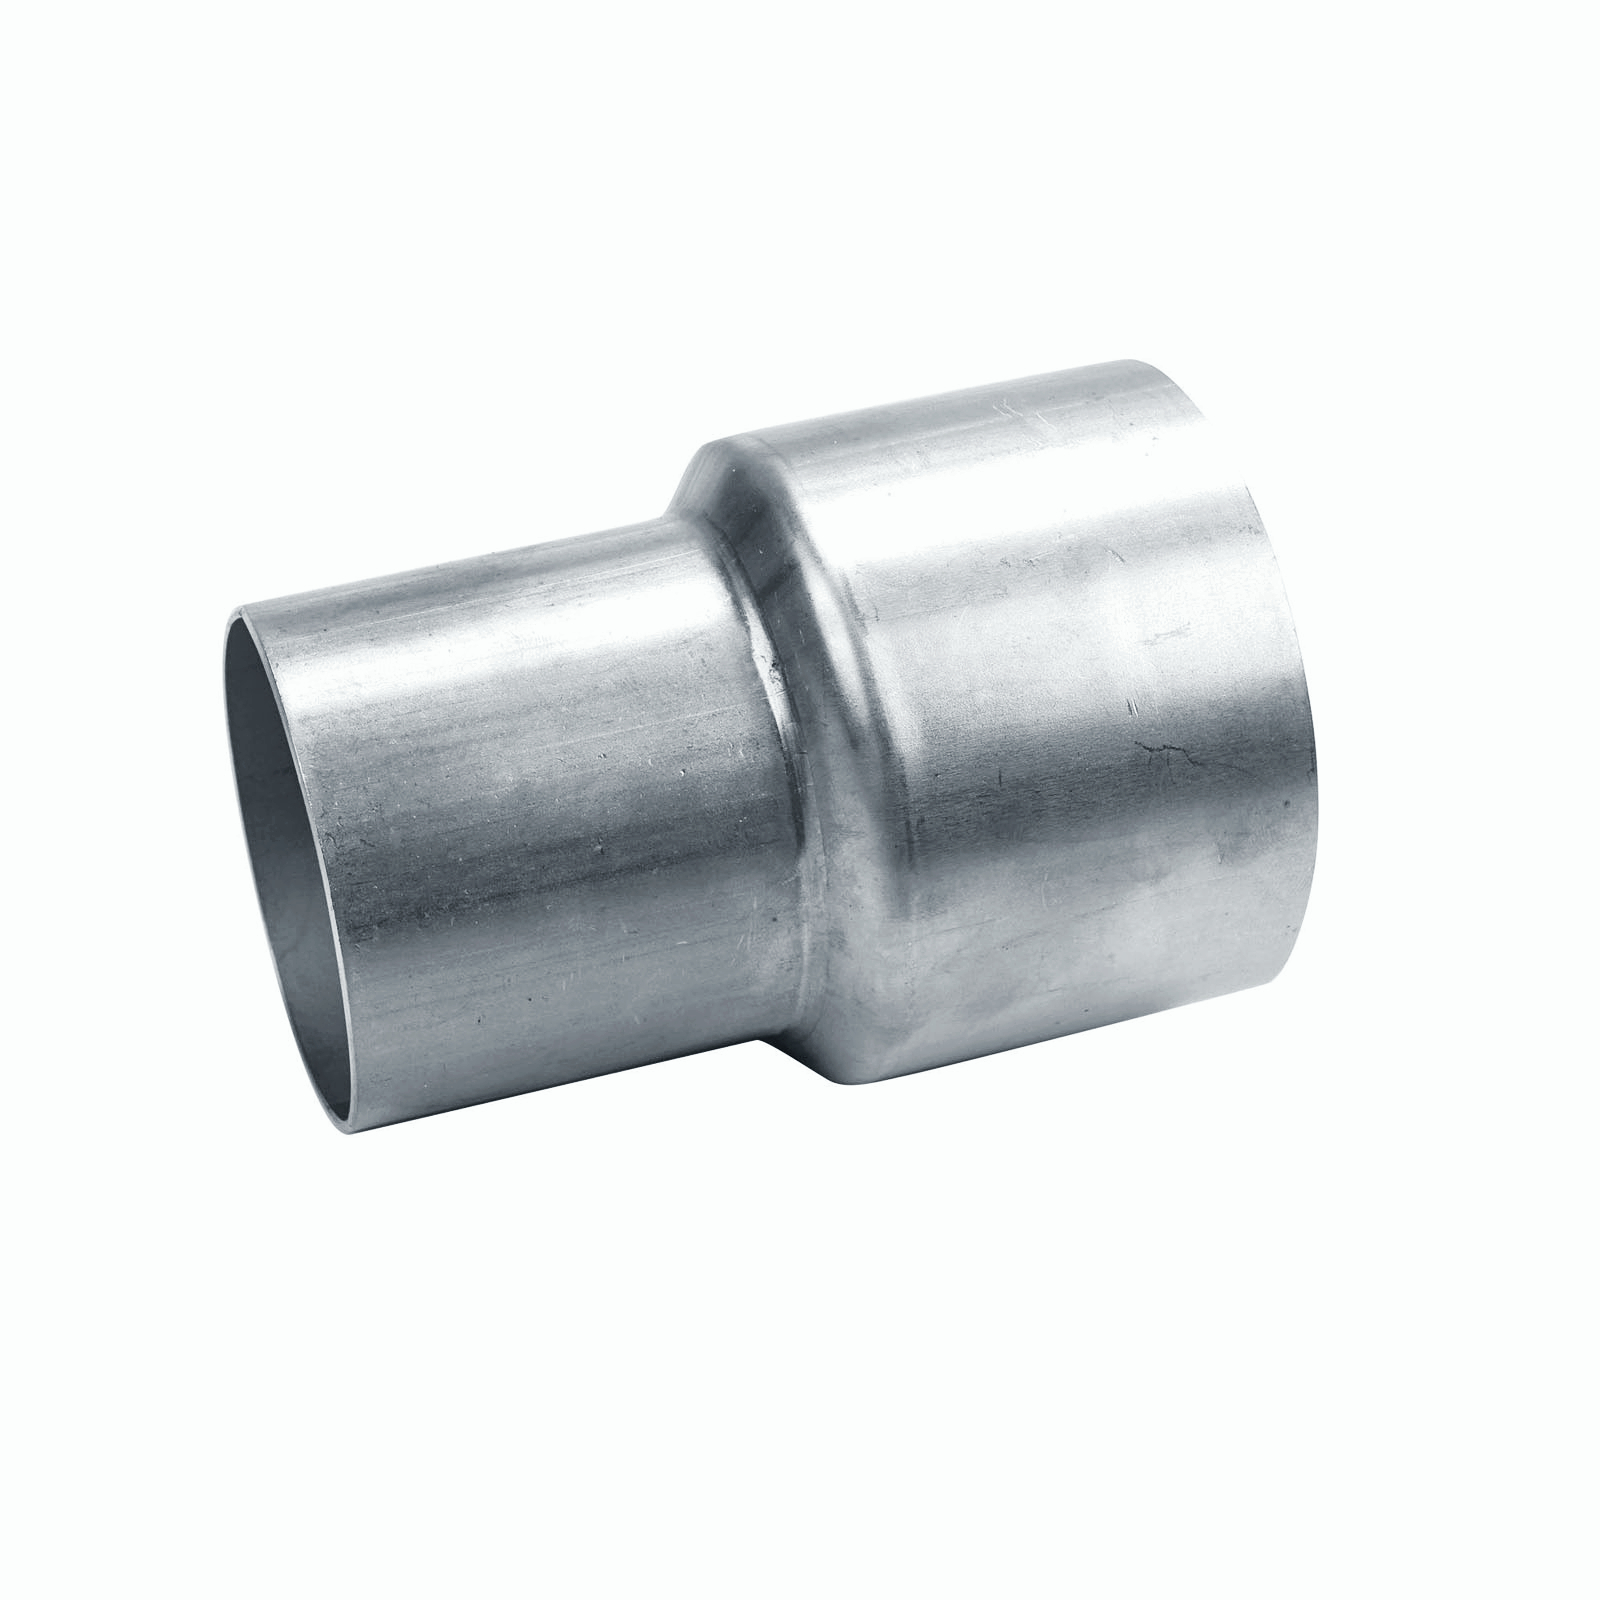 2.5" 2 1/2” ID To 3” Inch ID Universal Exhaust Pipe To Pipe Adapter Reducer Component Adapter Connector